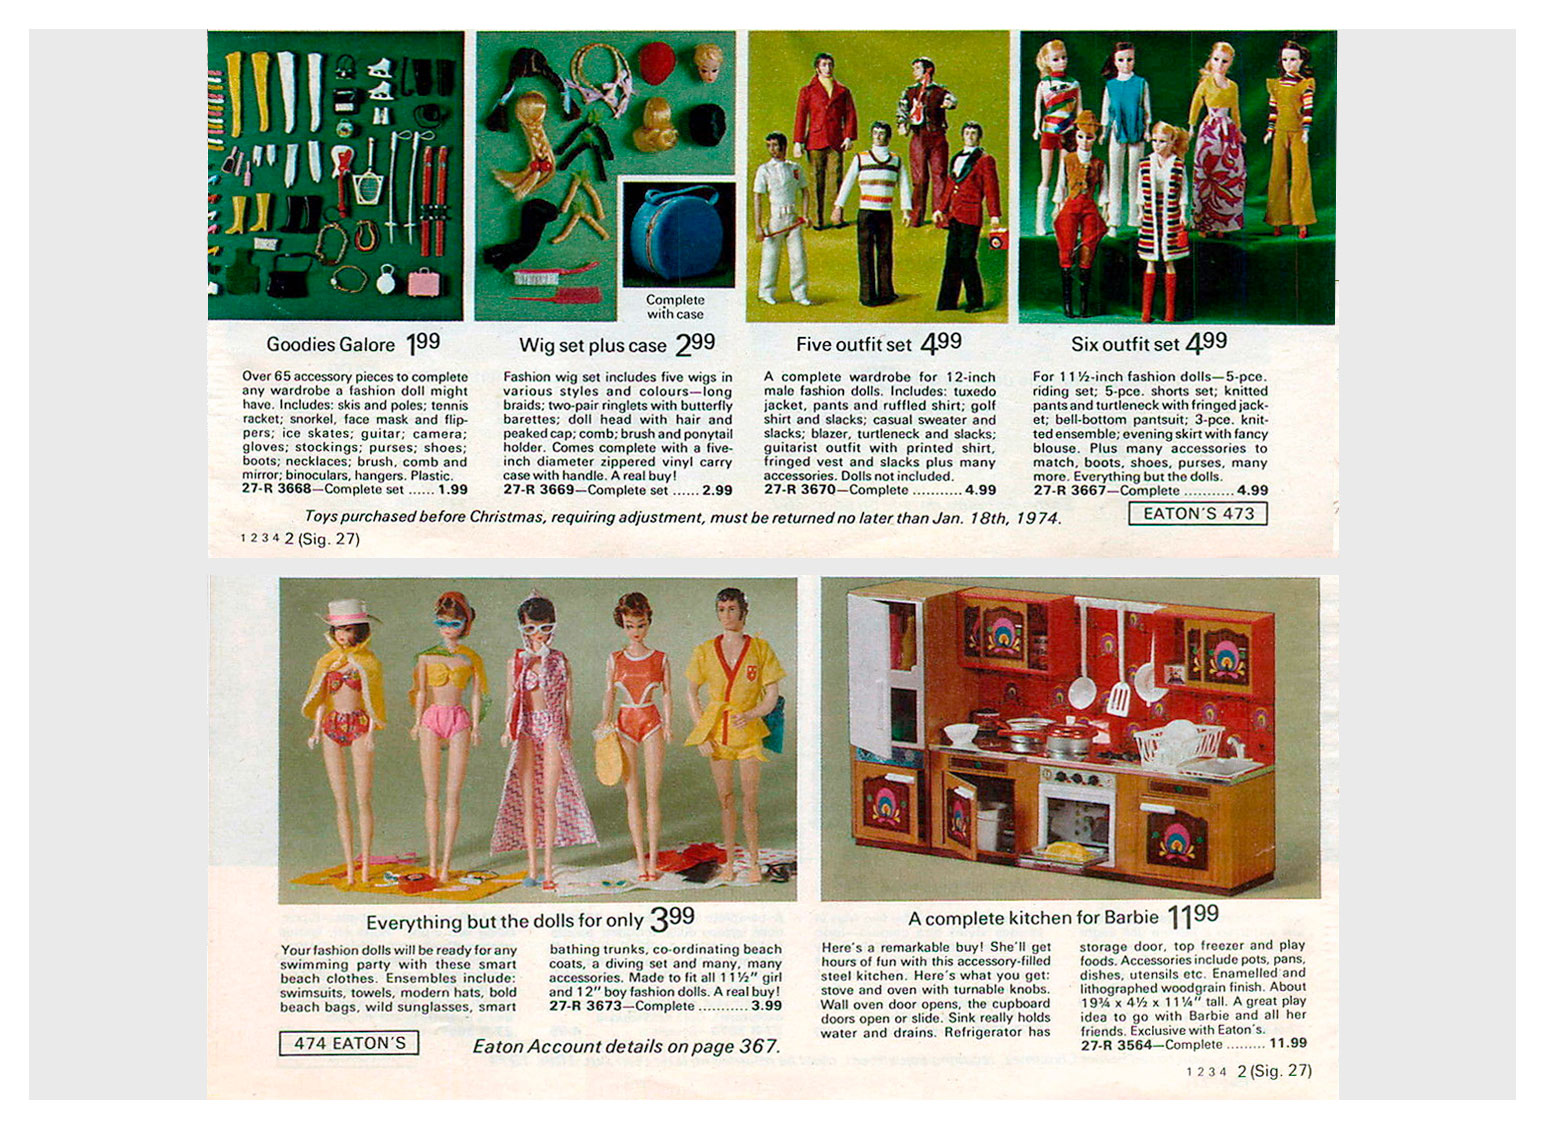 From 1973 Eaton's Christmas catalogue